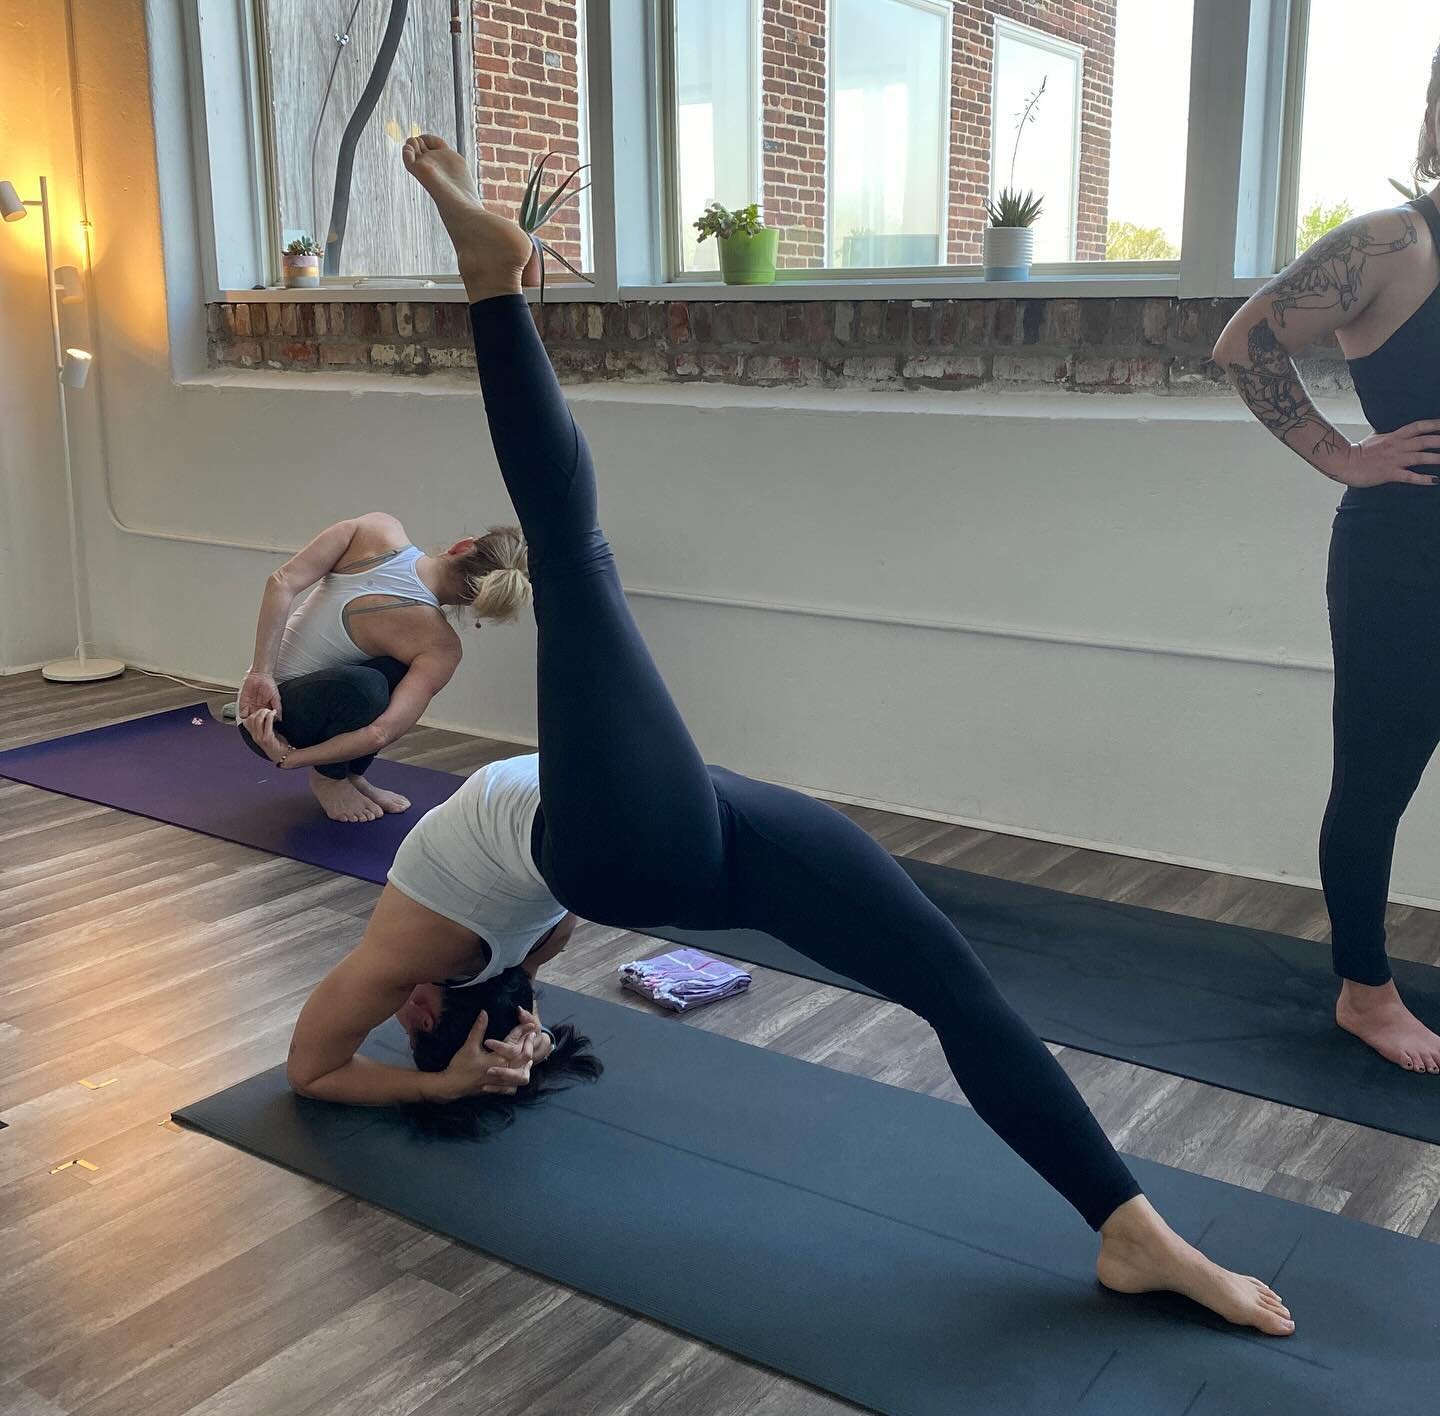 April is Alcohol Awareness Month, so we&rsquo;re participating in the @trinifoundation We Have Your Back Challenge! 

Day 6: Eka Pada Viparita Dandasana, or One Leg Inverted Staff Pose

Thanks to everyone who participated in this challenge to help sp